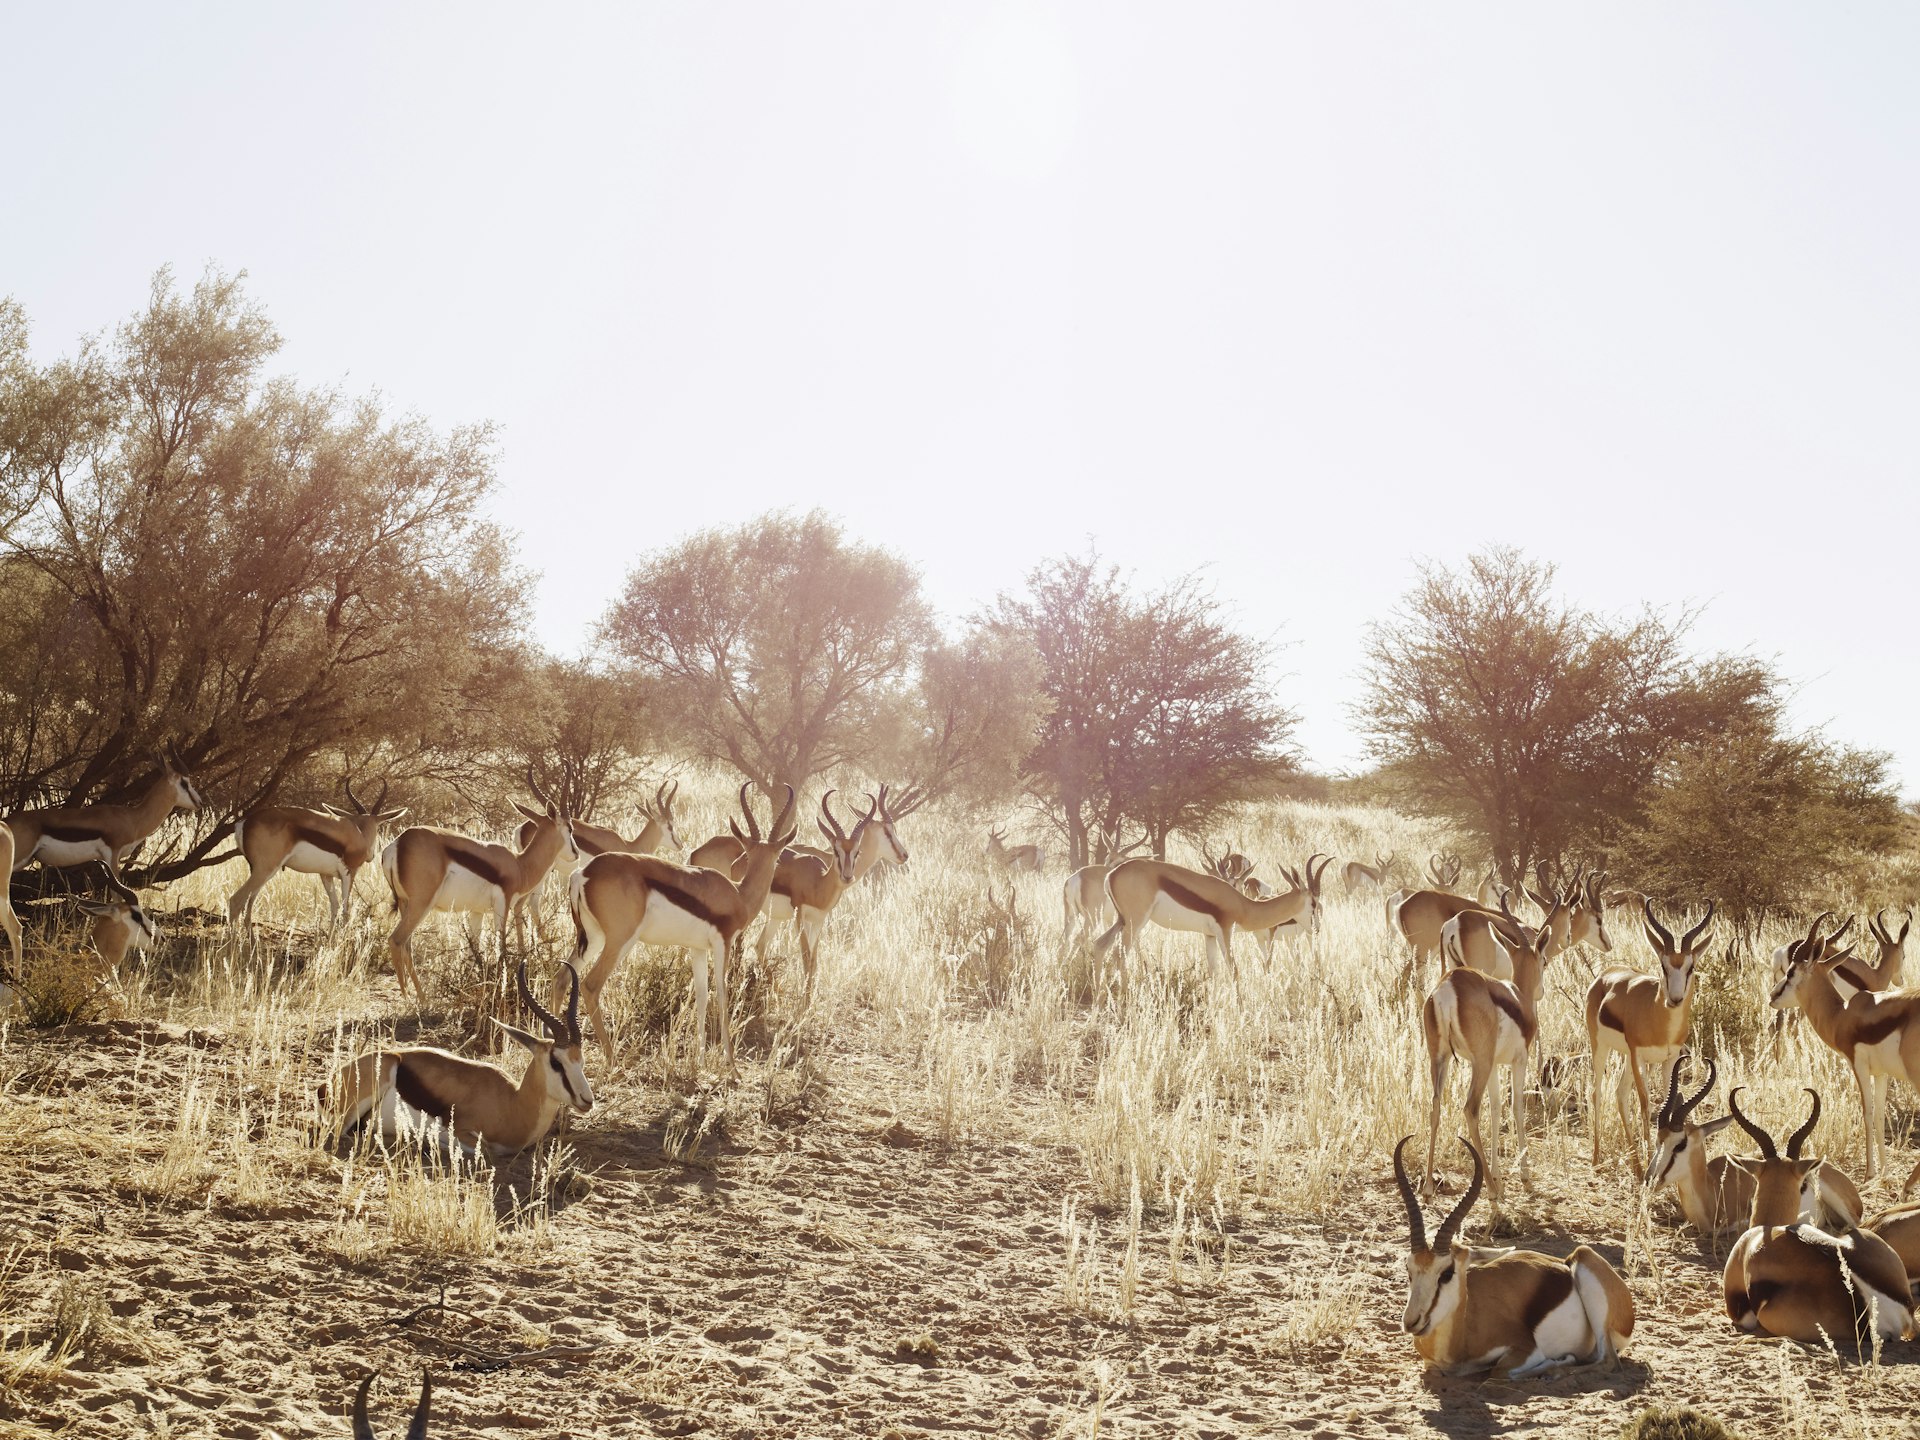 Herd of springbok in parched grasslands of Kgalagadi Transfrontier Park, South Africa